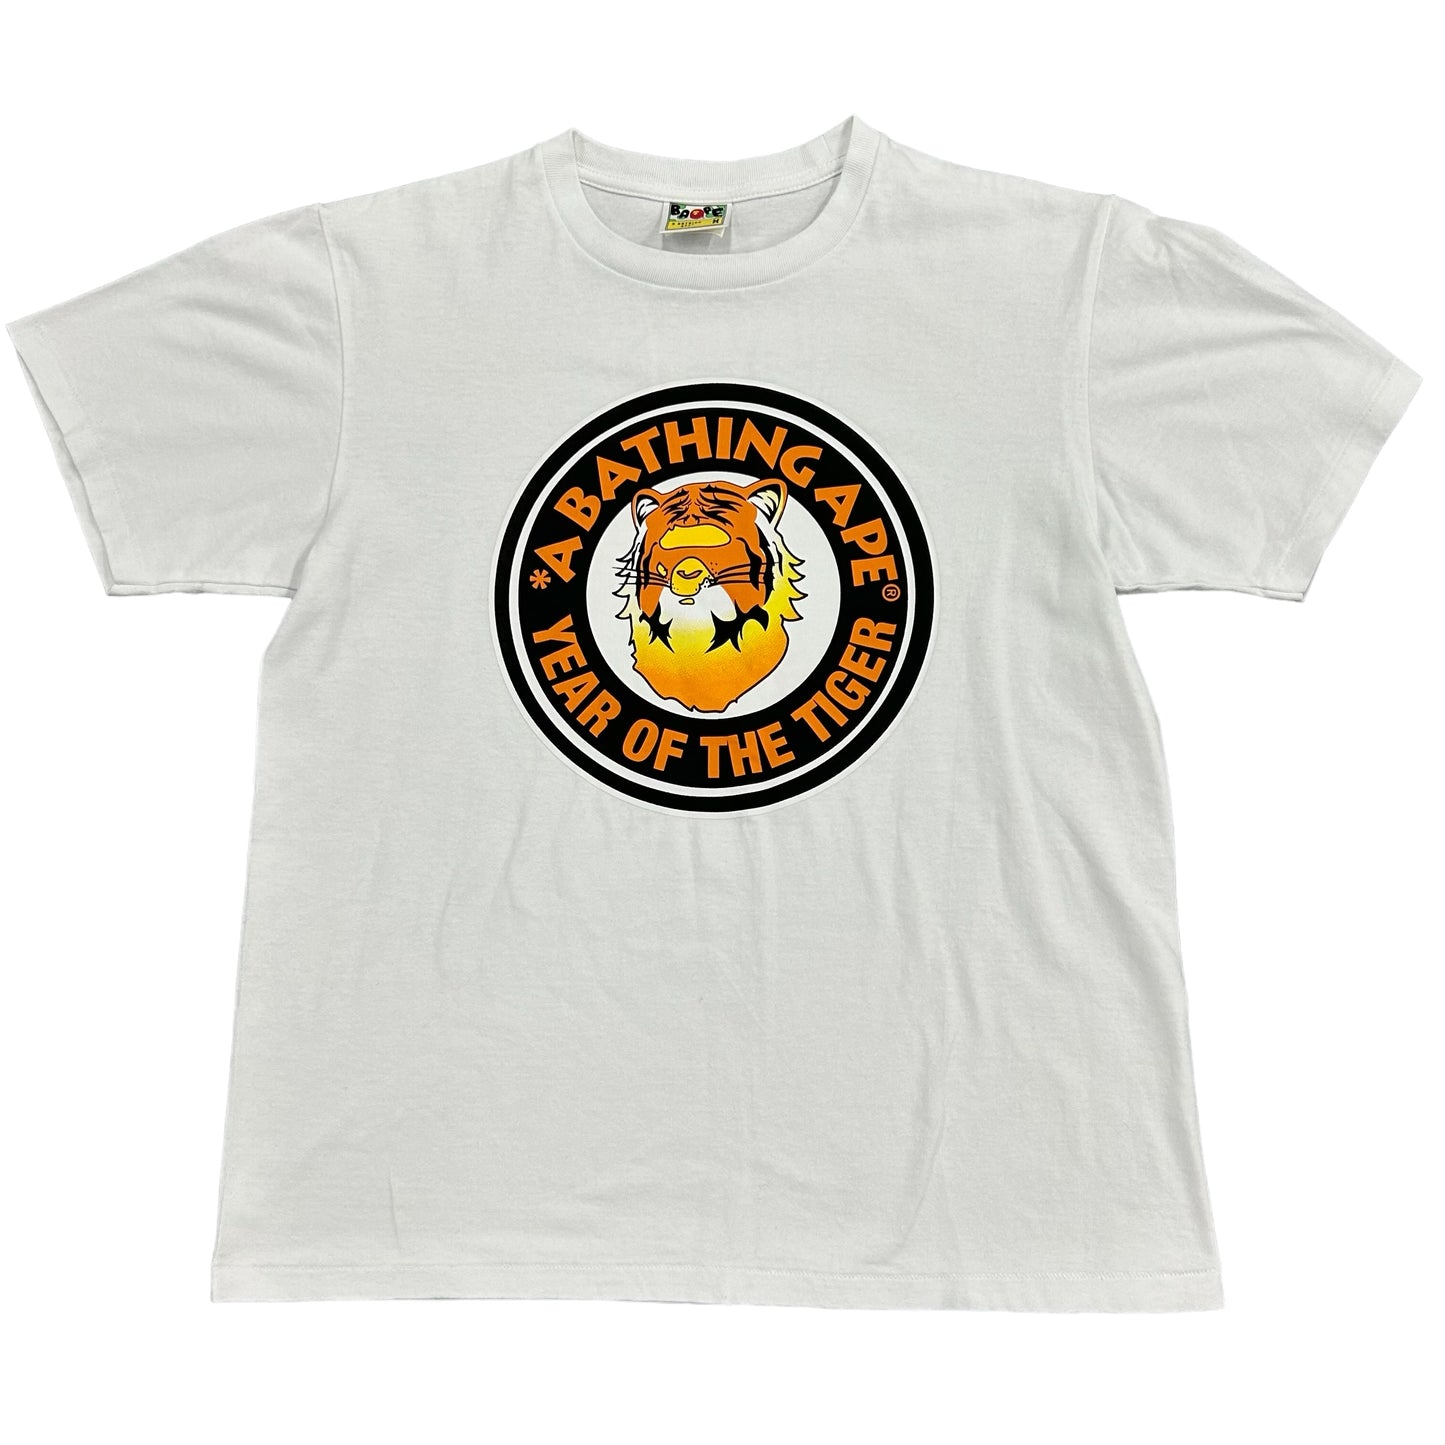 BAPE Year of the Tiger White Tee